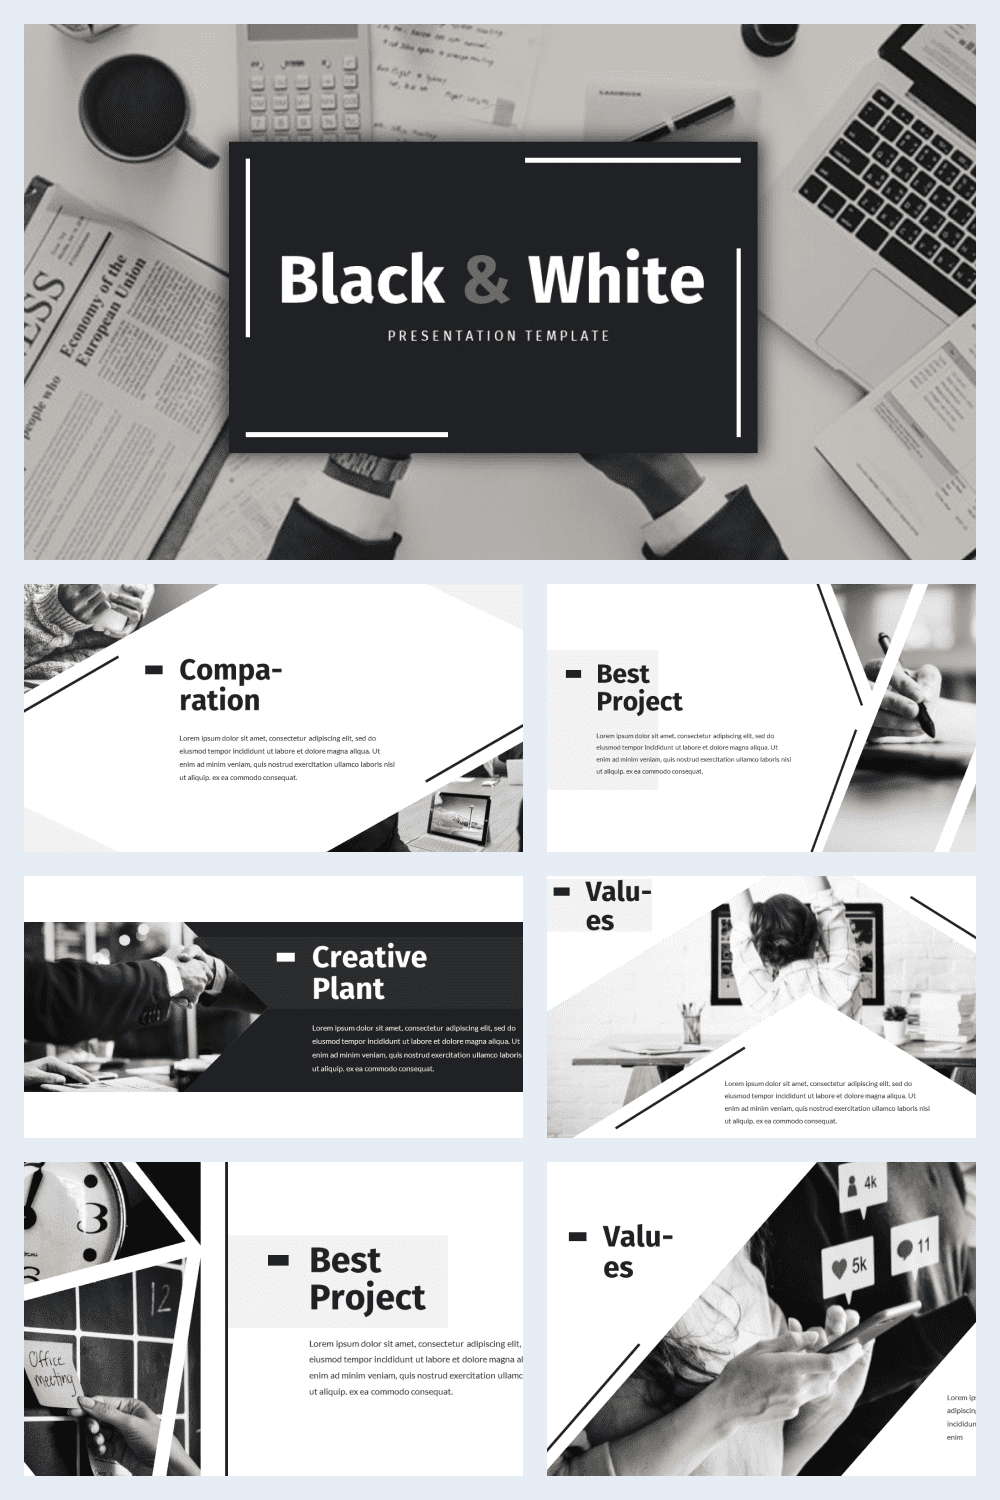 Black & White - business powerpoint template.